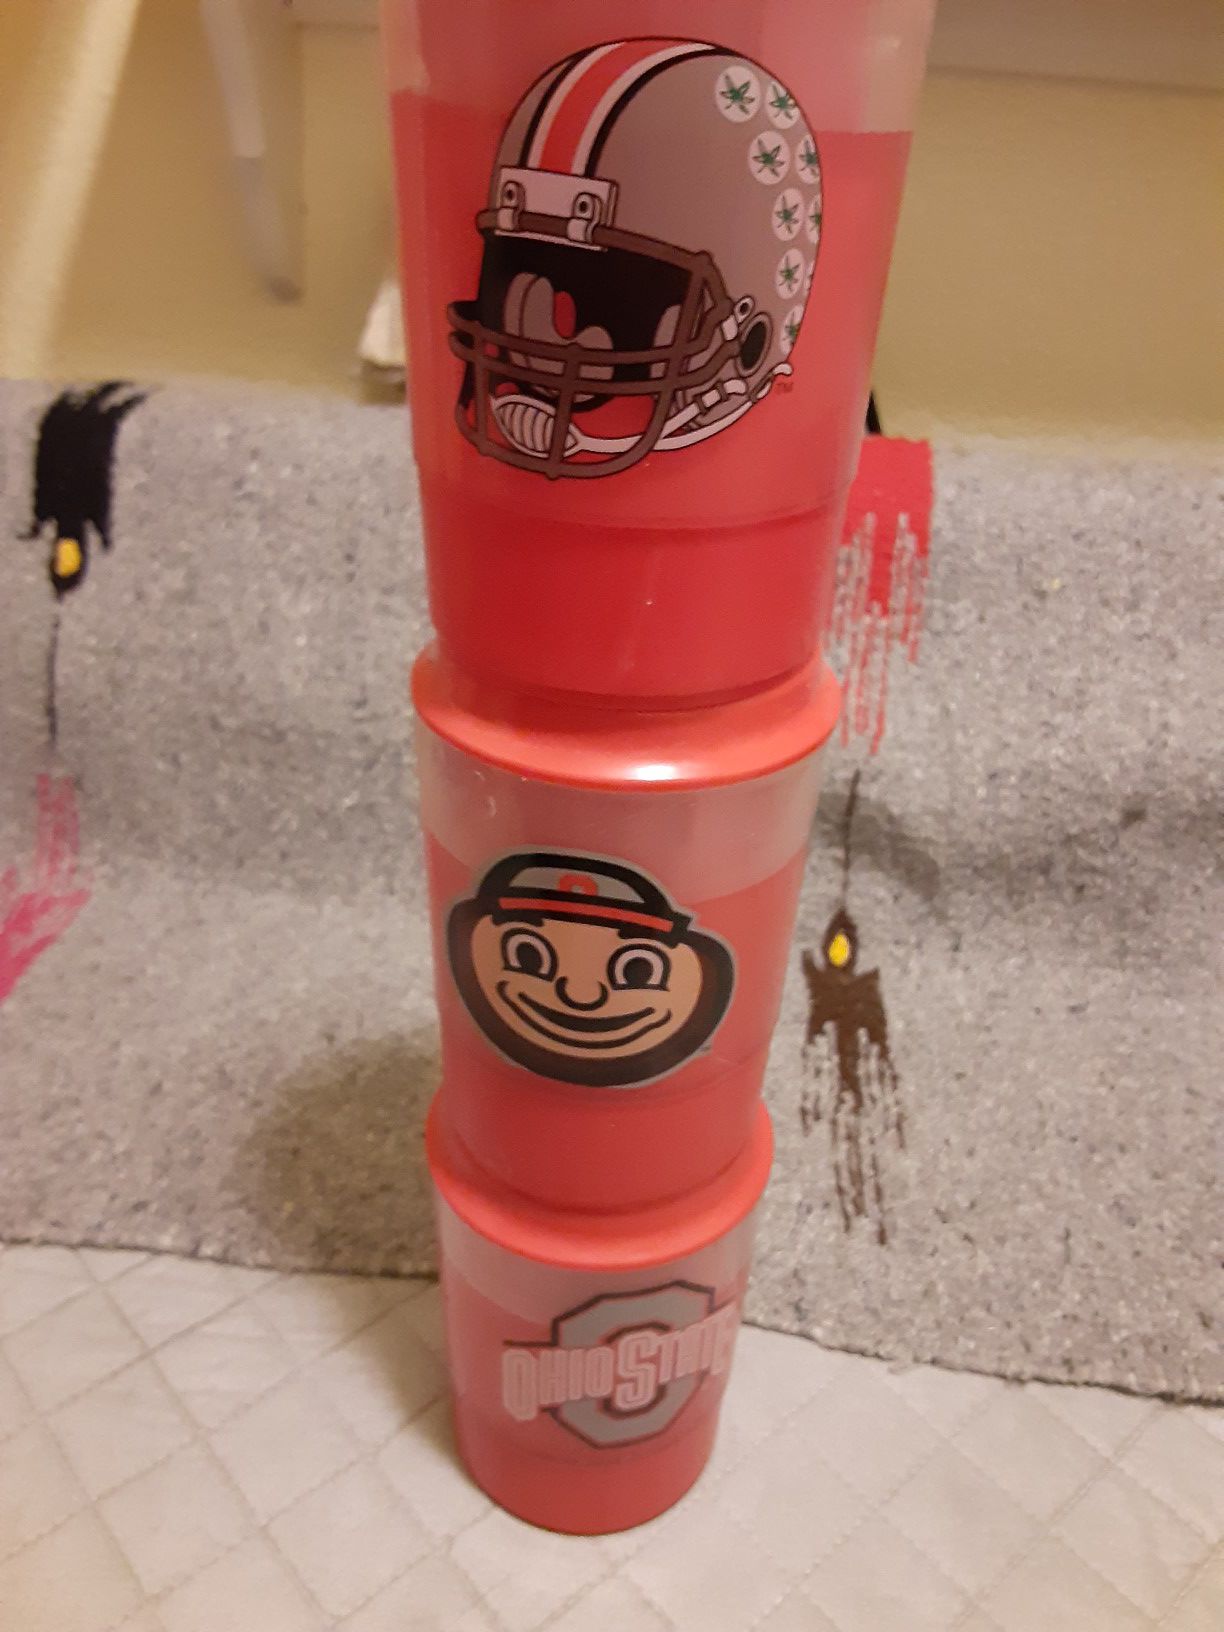 Ohio state Cooler cups